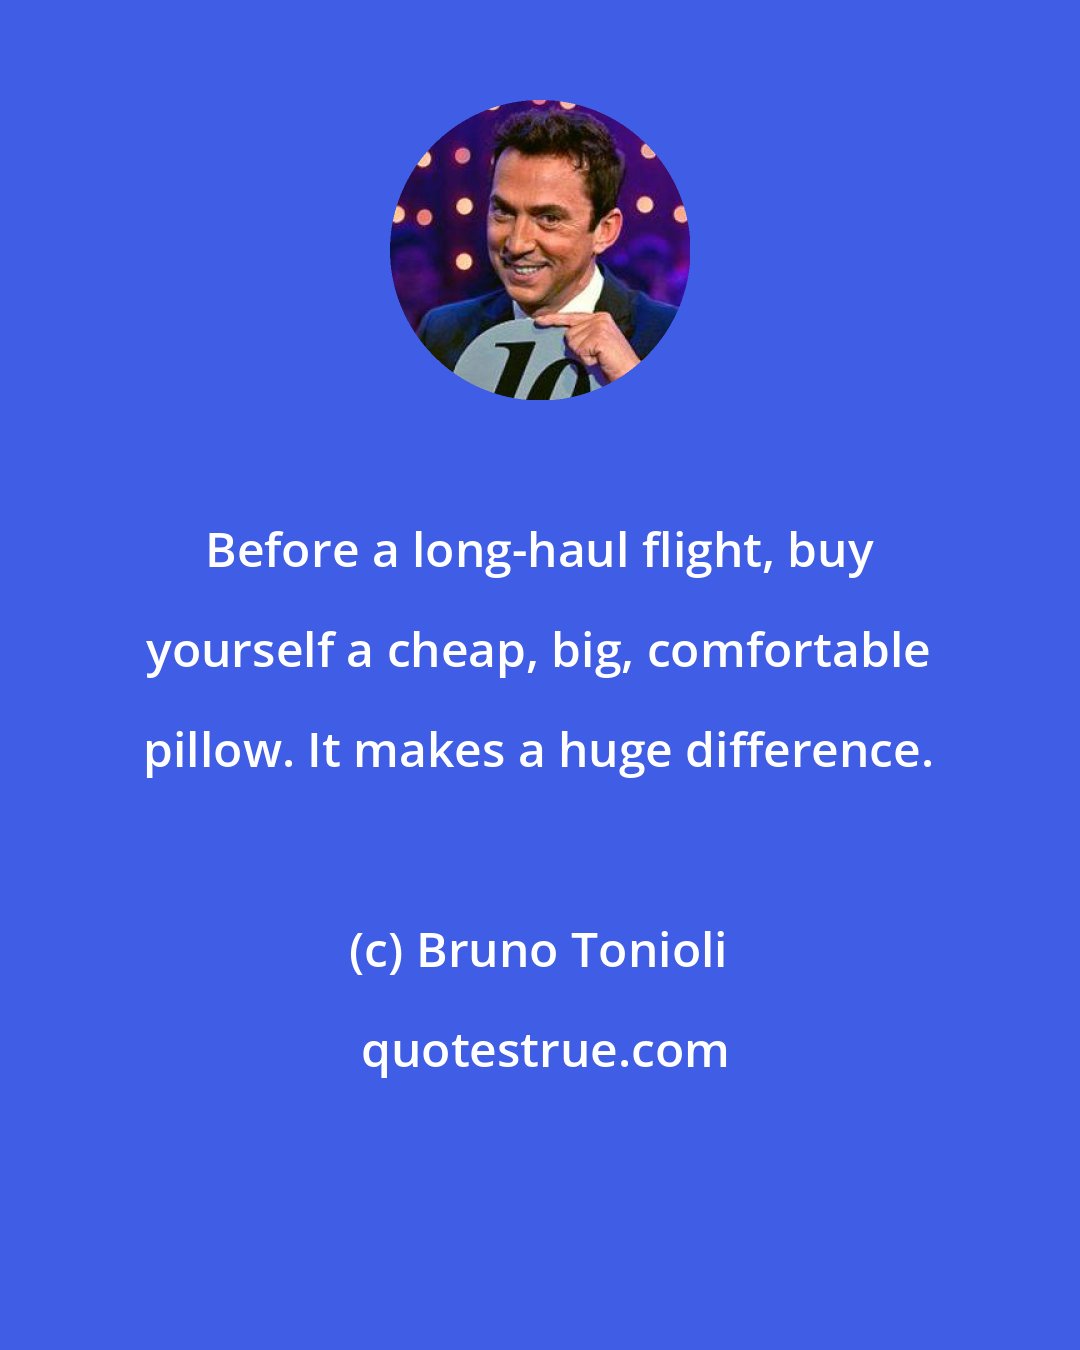 Bruno Tonioli: Before a long-haul flight, buy yourself a cheap, big, comfortable pillow. It makes a huge difference.